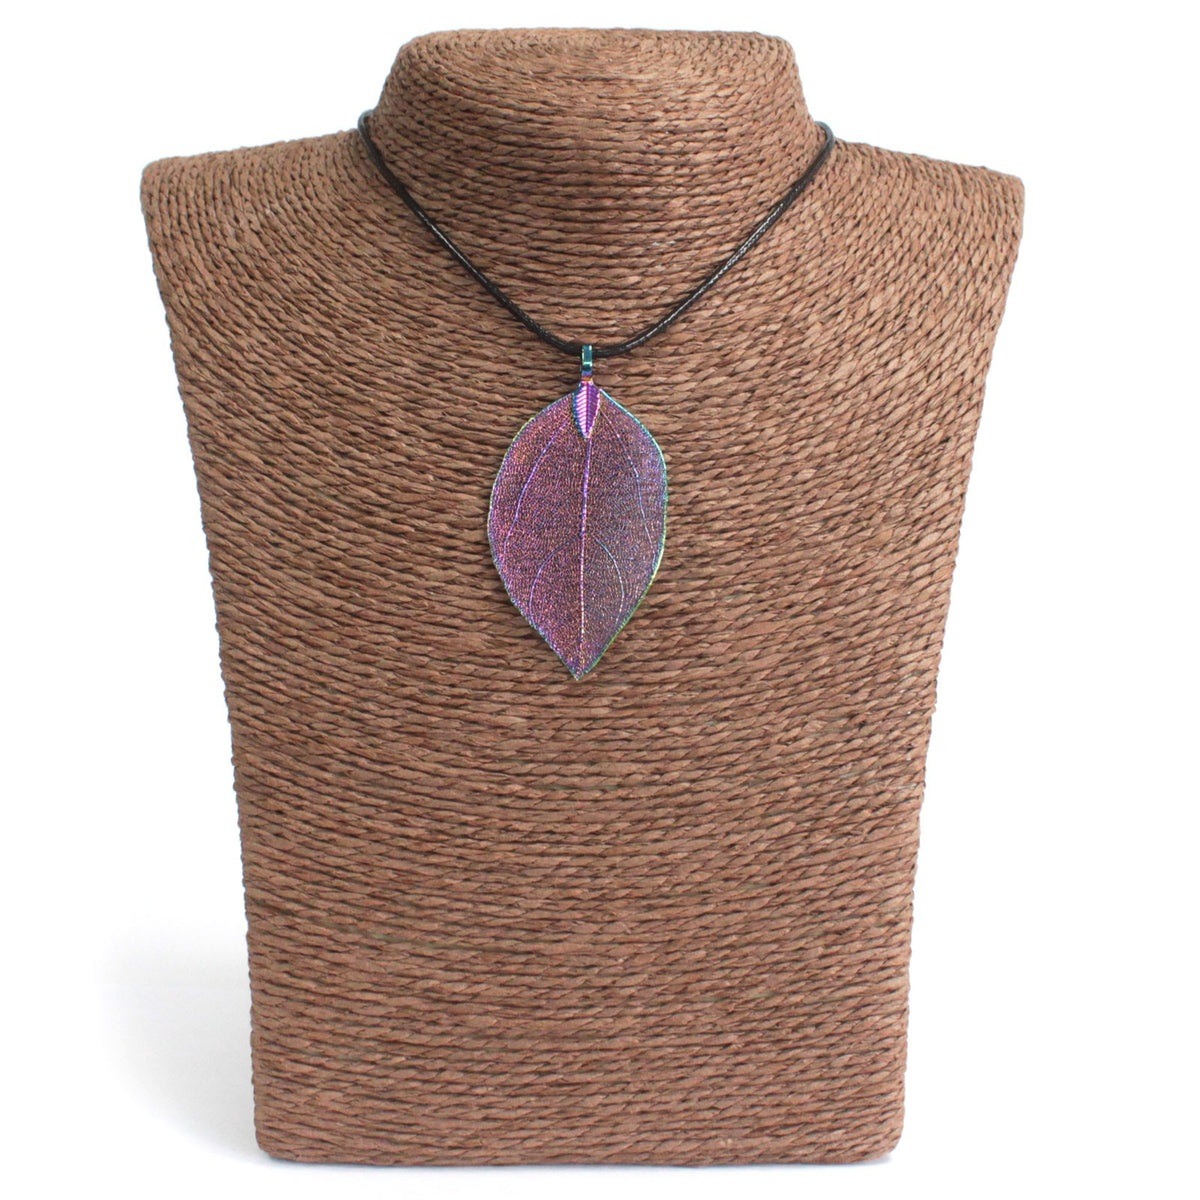 Bravery Leaf Necklace - Gold or Silver